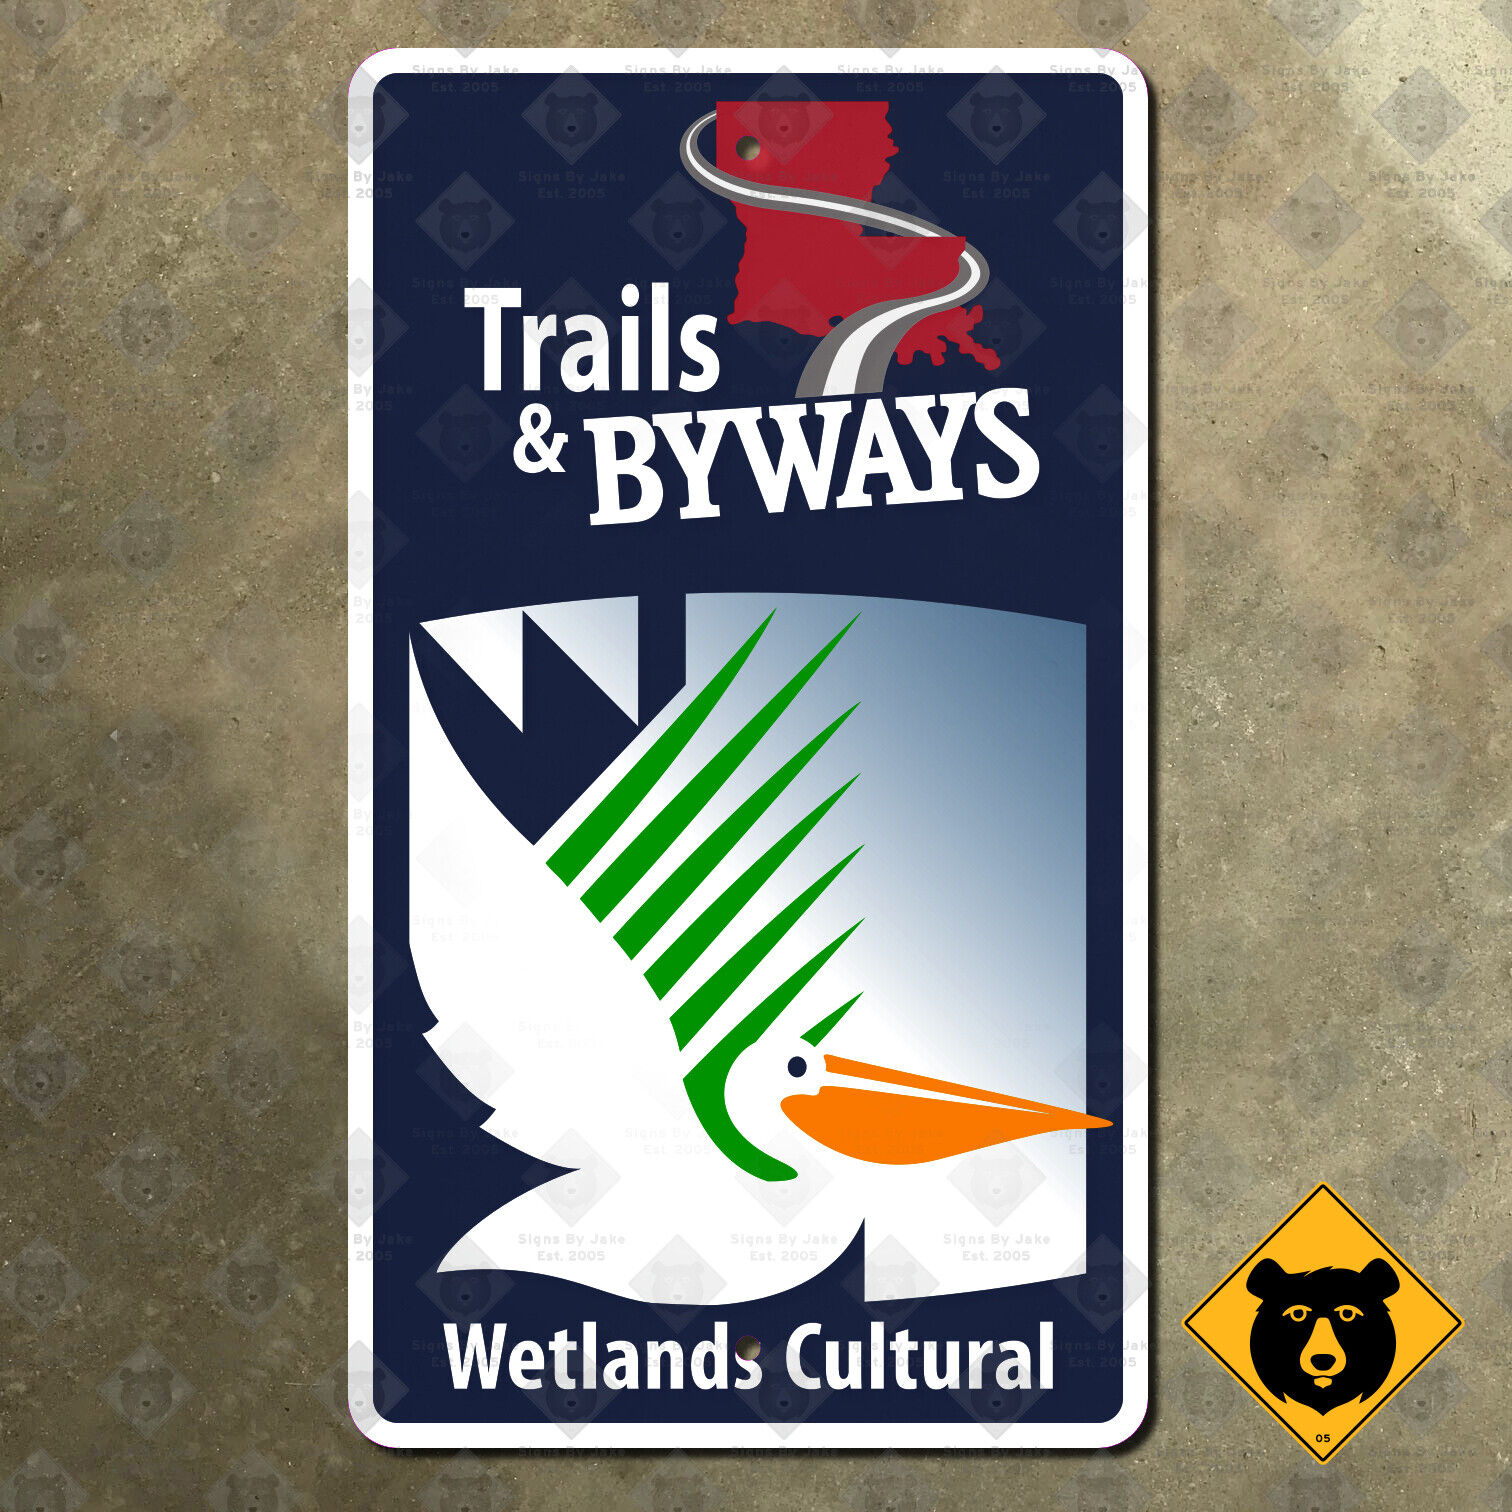 Louisiana Wetlands Cultural Trail byways highway road sign scenic route 12x21